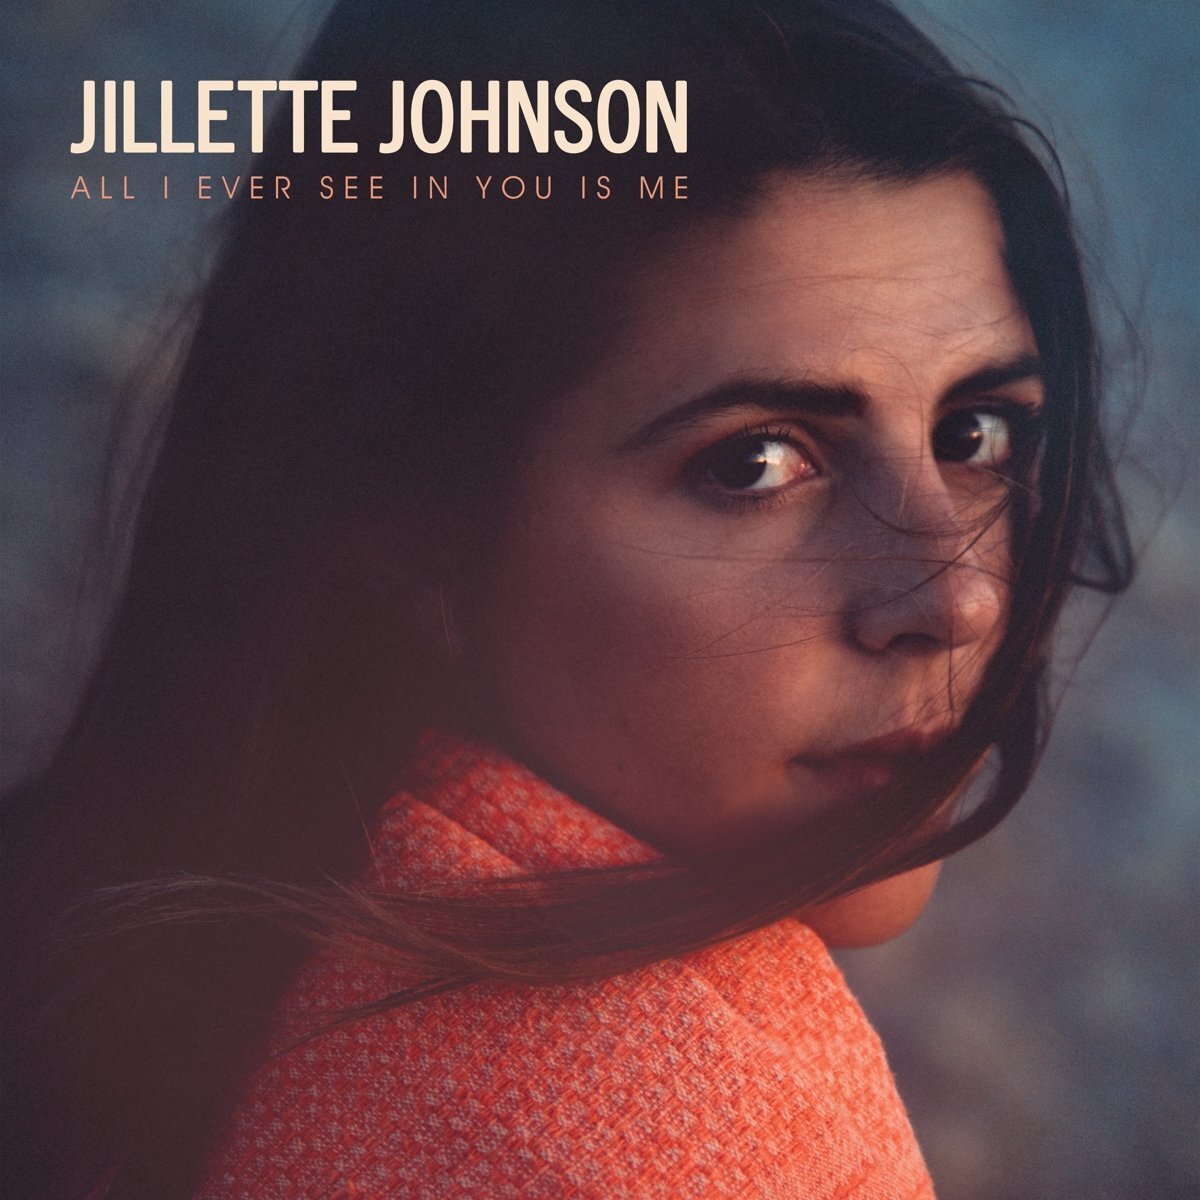 Jillette Johnson All I Ever See In You Is Me brightmanmusic.com.jpg